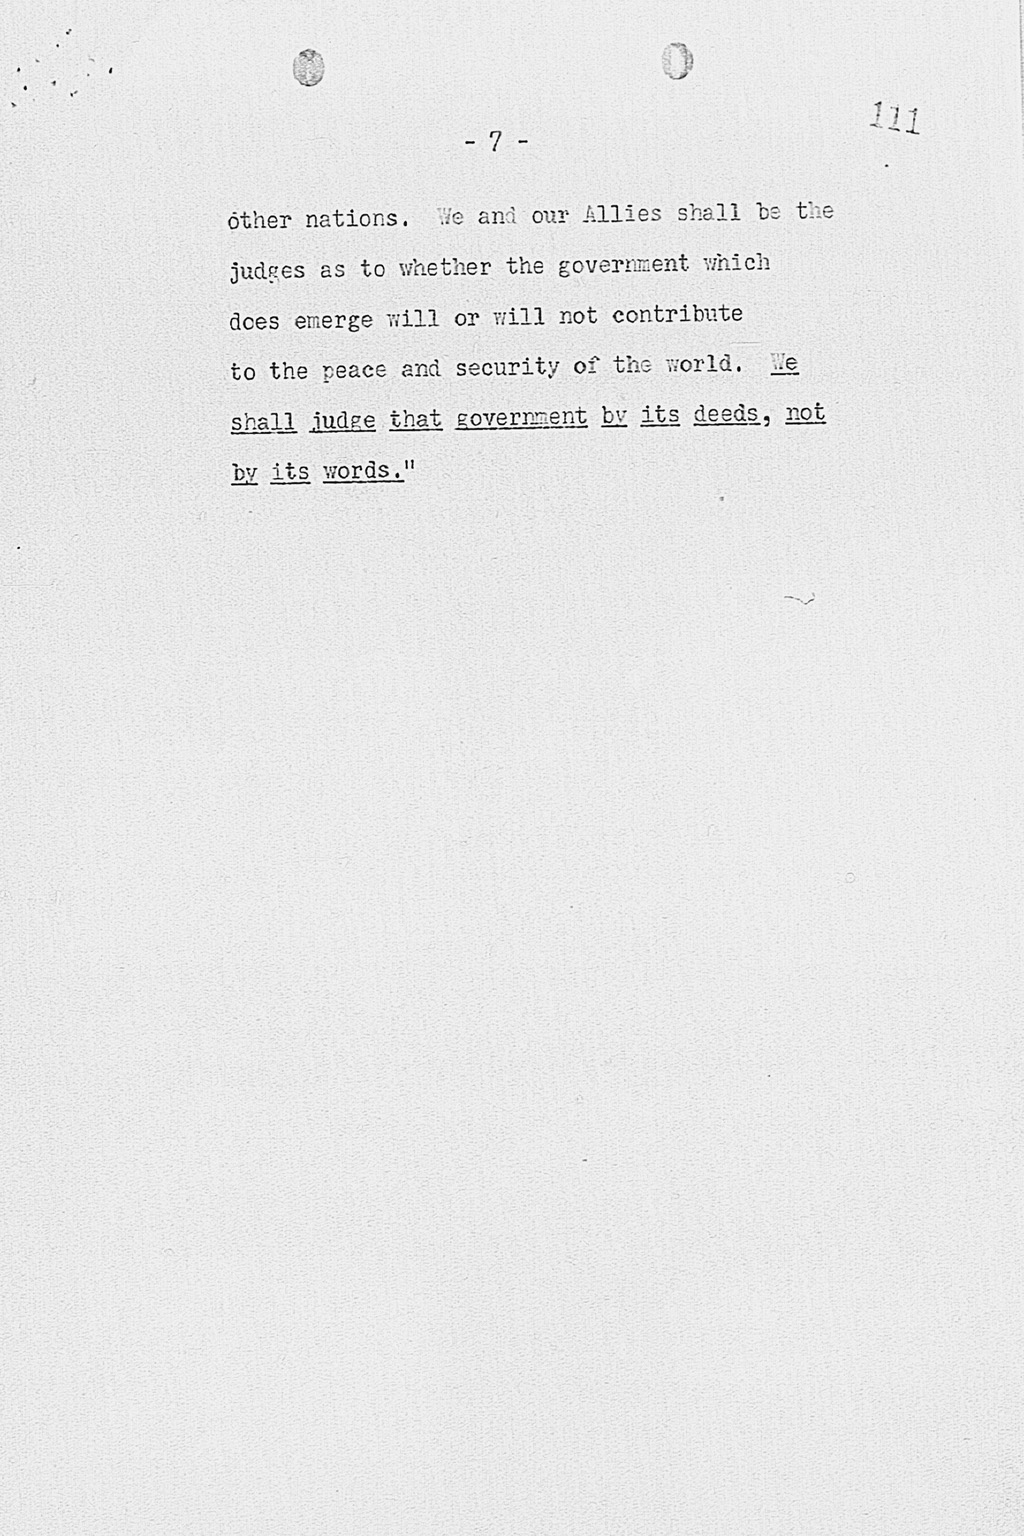 『Letter from George Atcheson Jr. to Dean Acheson, Under Secretary of State dated November 7, 1945.』(拡大画像)